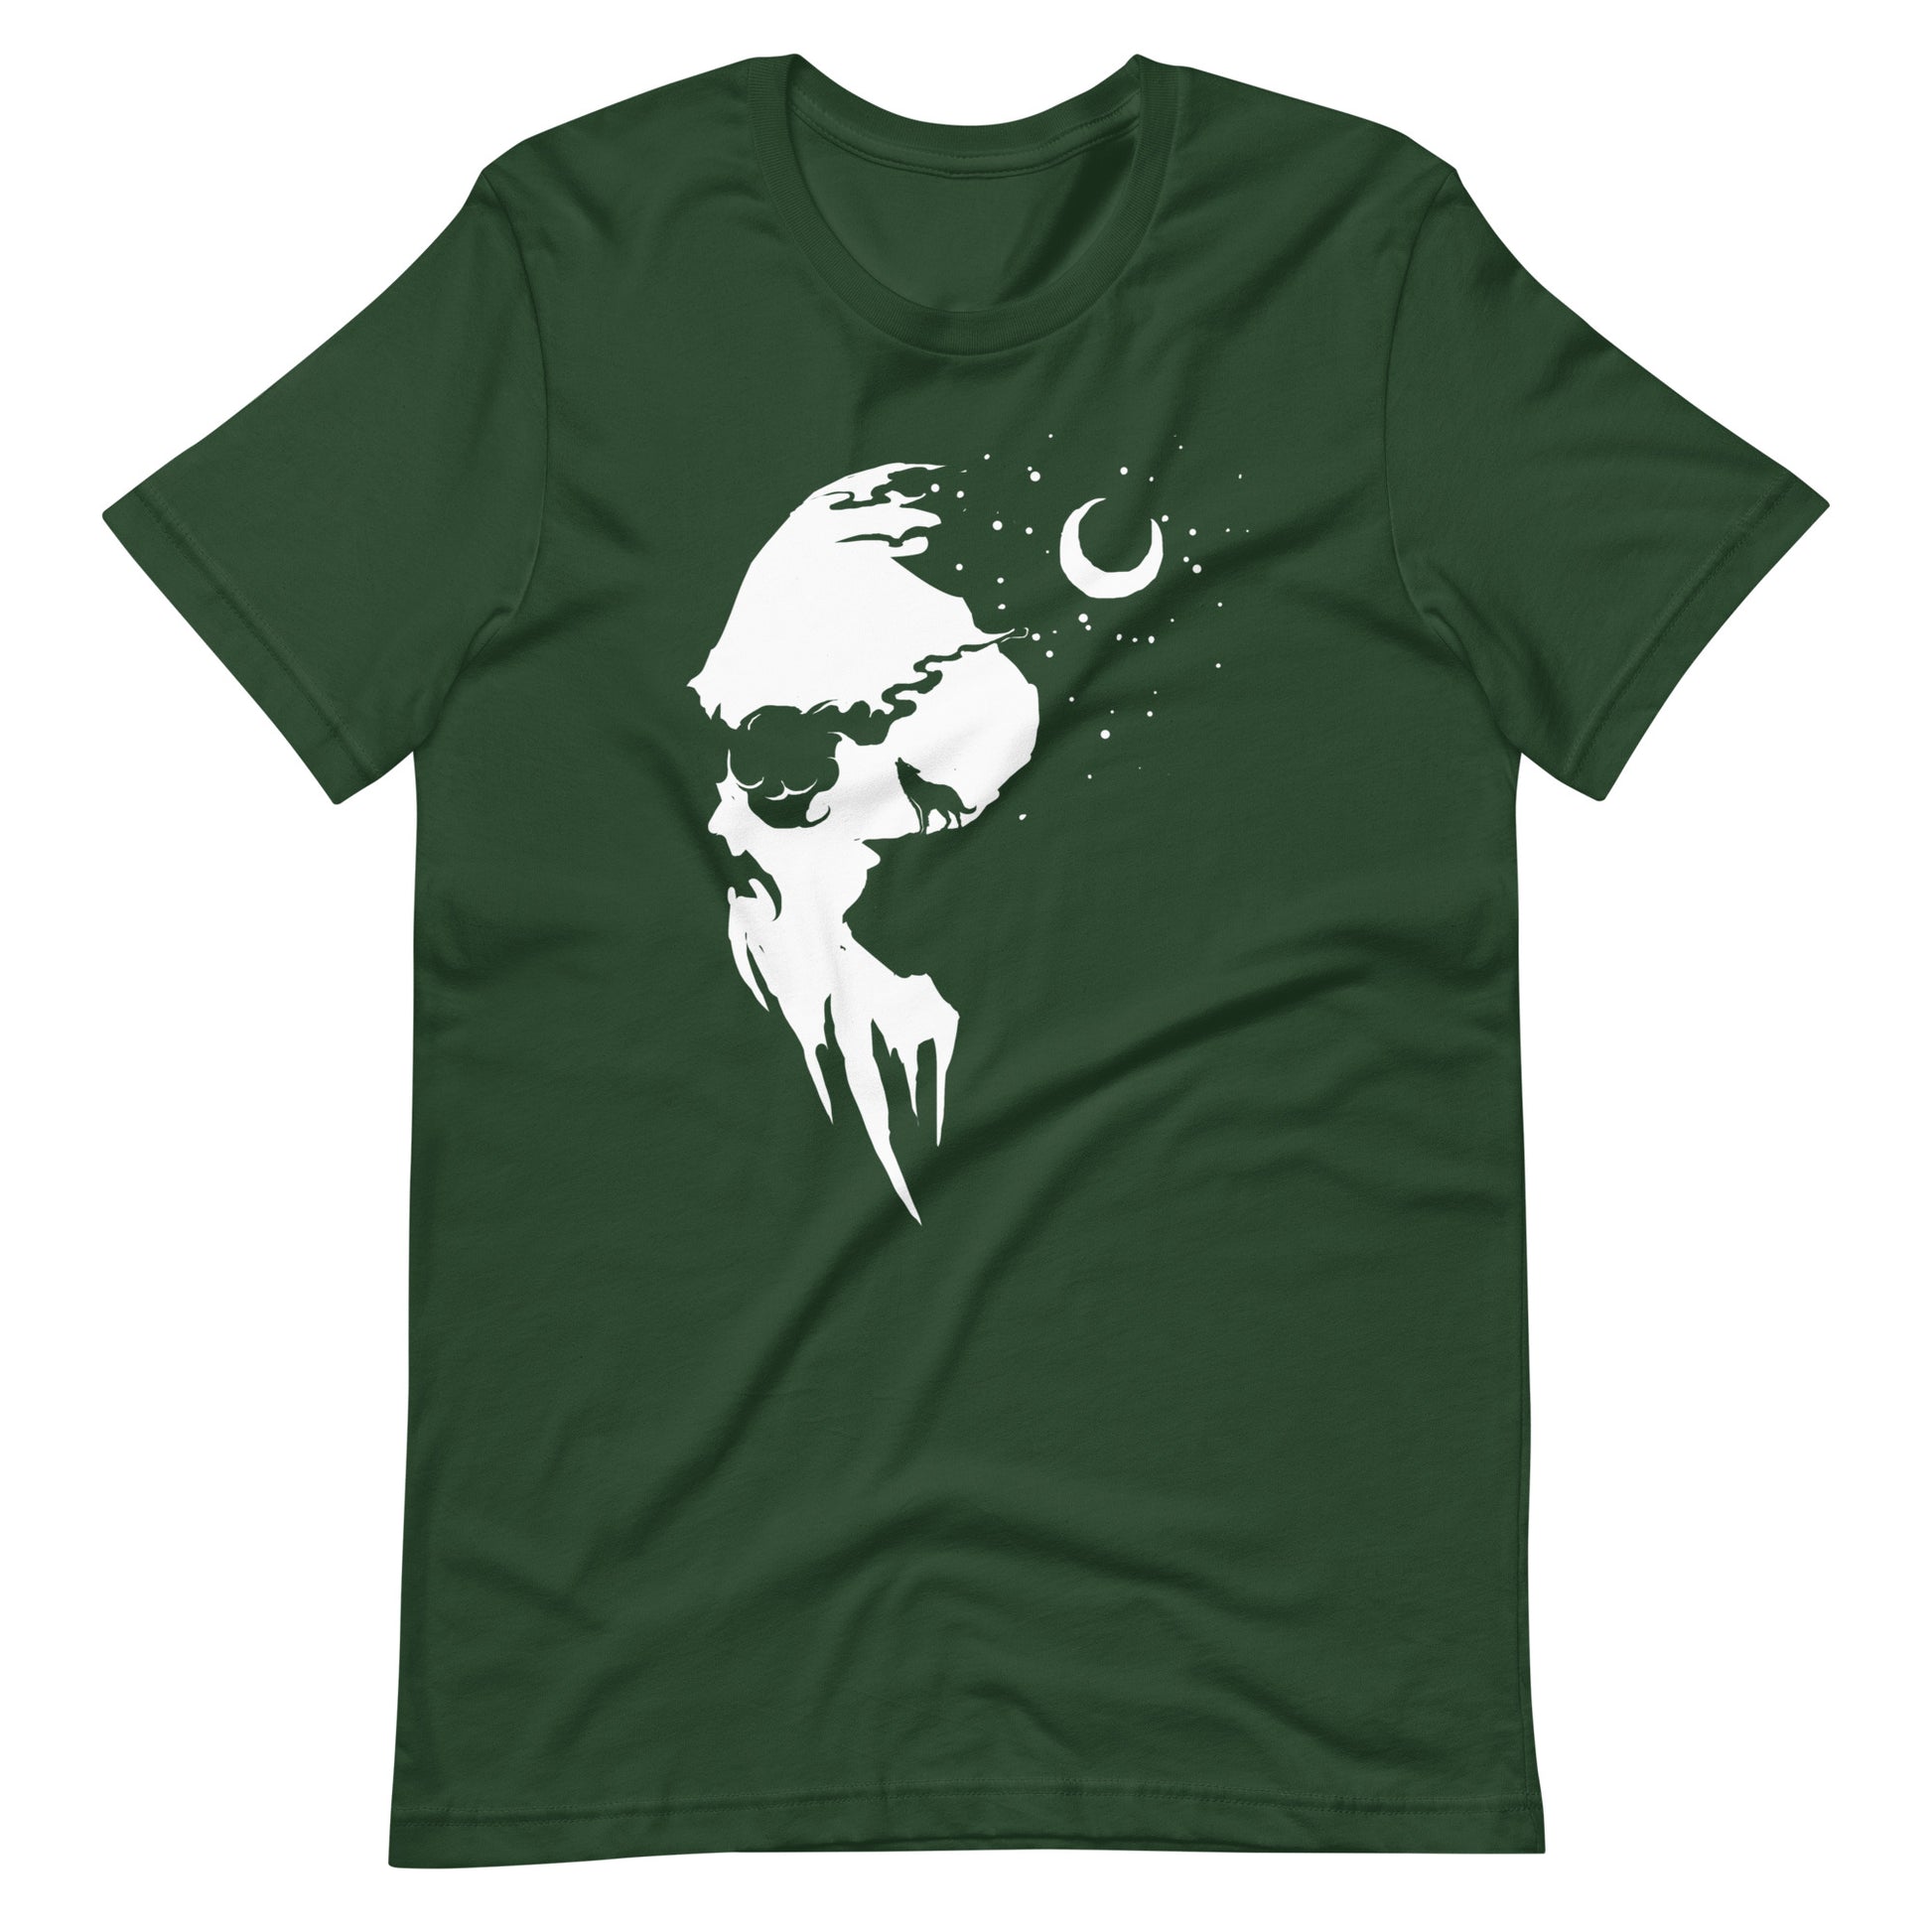 The Night Has Come - Men's t-shirt - Forest Front